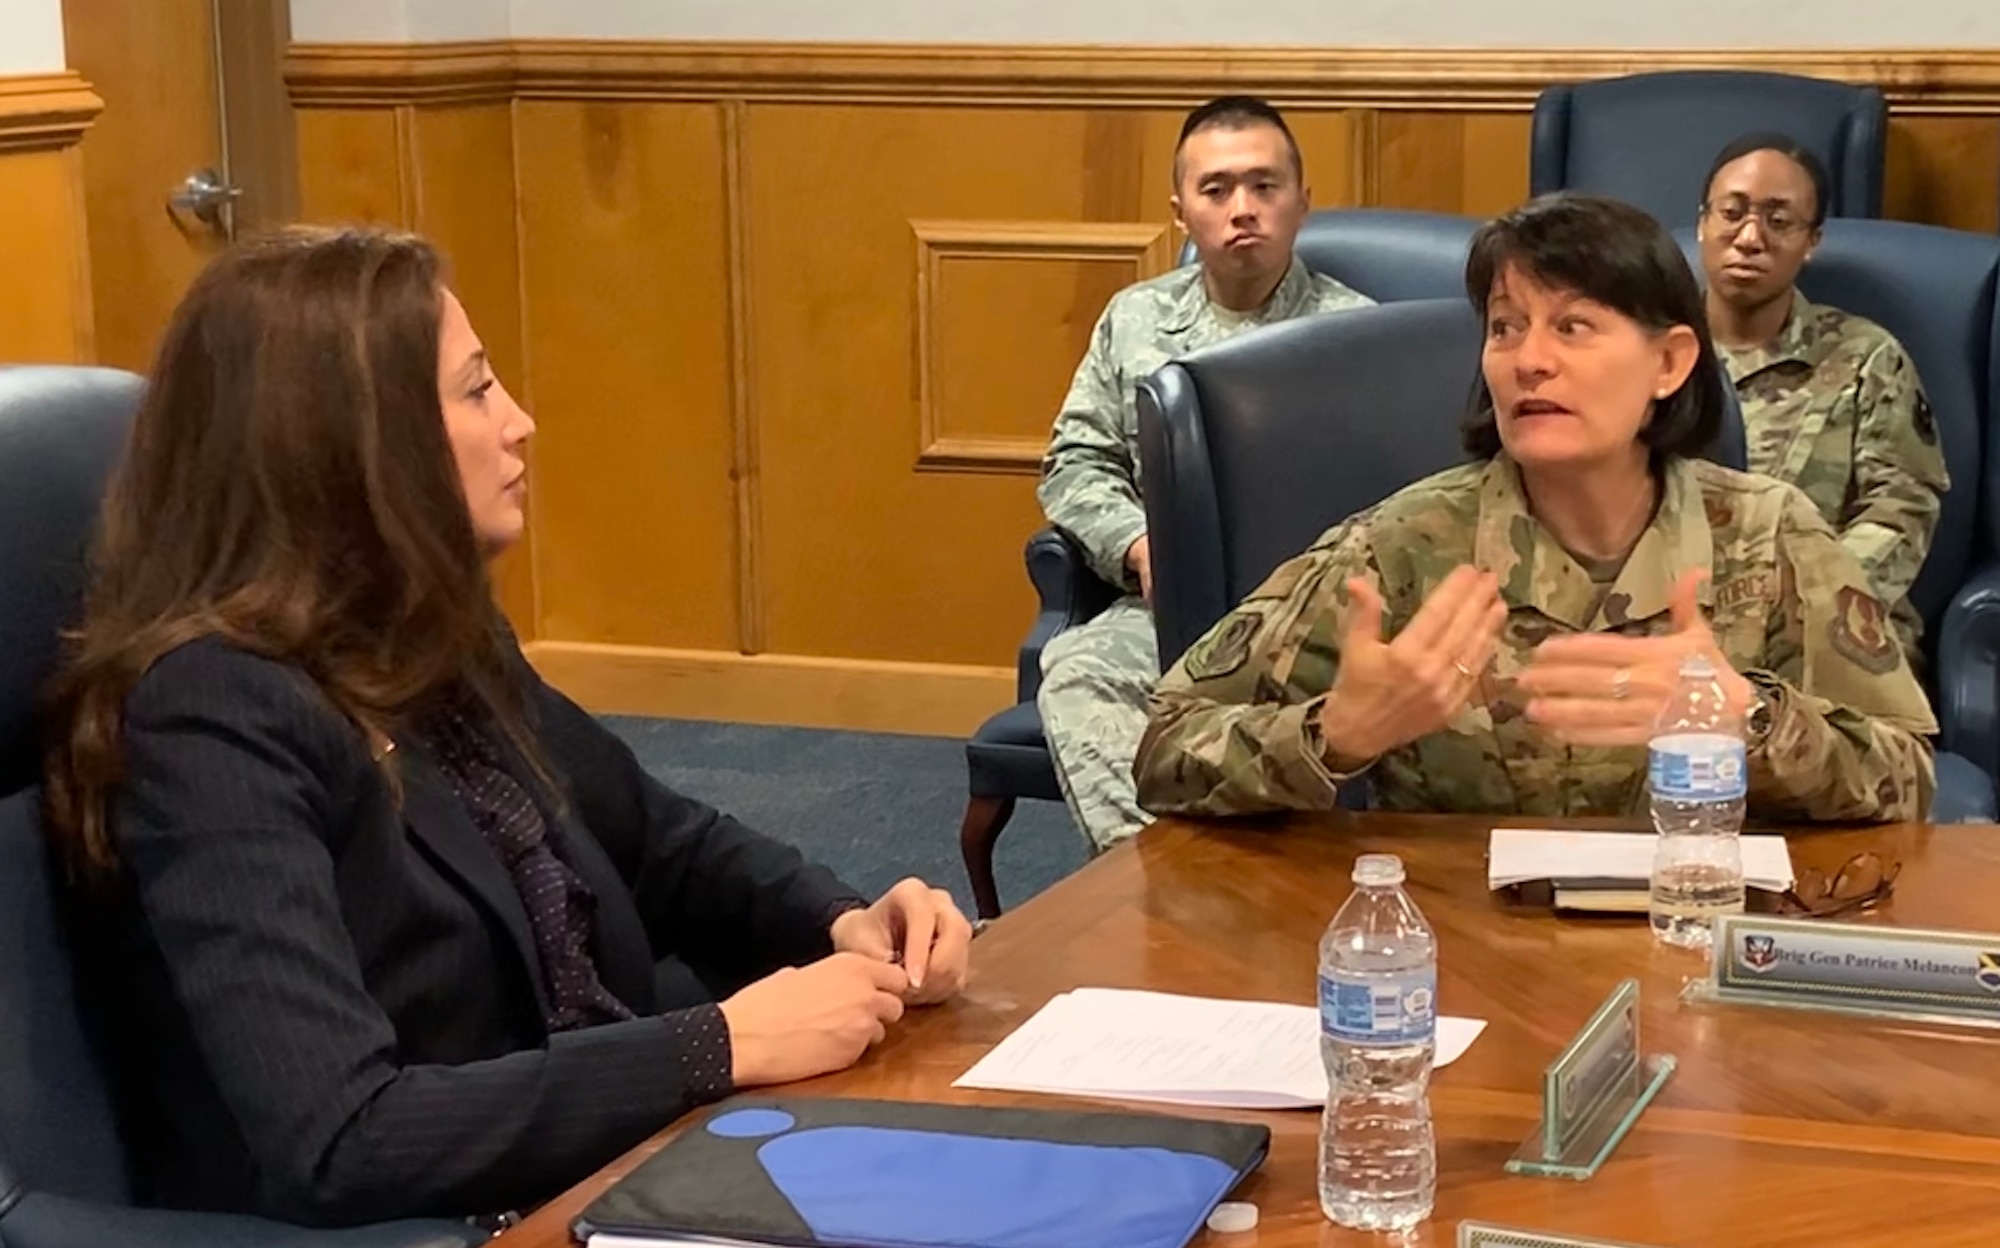 (Right) Brigadier Gen. Patrice Melancon, Tyndall Program Management Office executive director, (Left) Dr. Julia Nesheiwat, Florida Chief Resilience Officer, discuss plans for the rebuild during a visit to the base and with the Tyndall PMO staff.